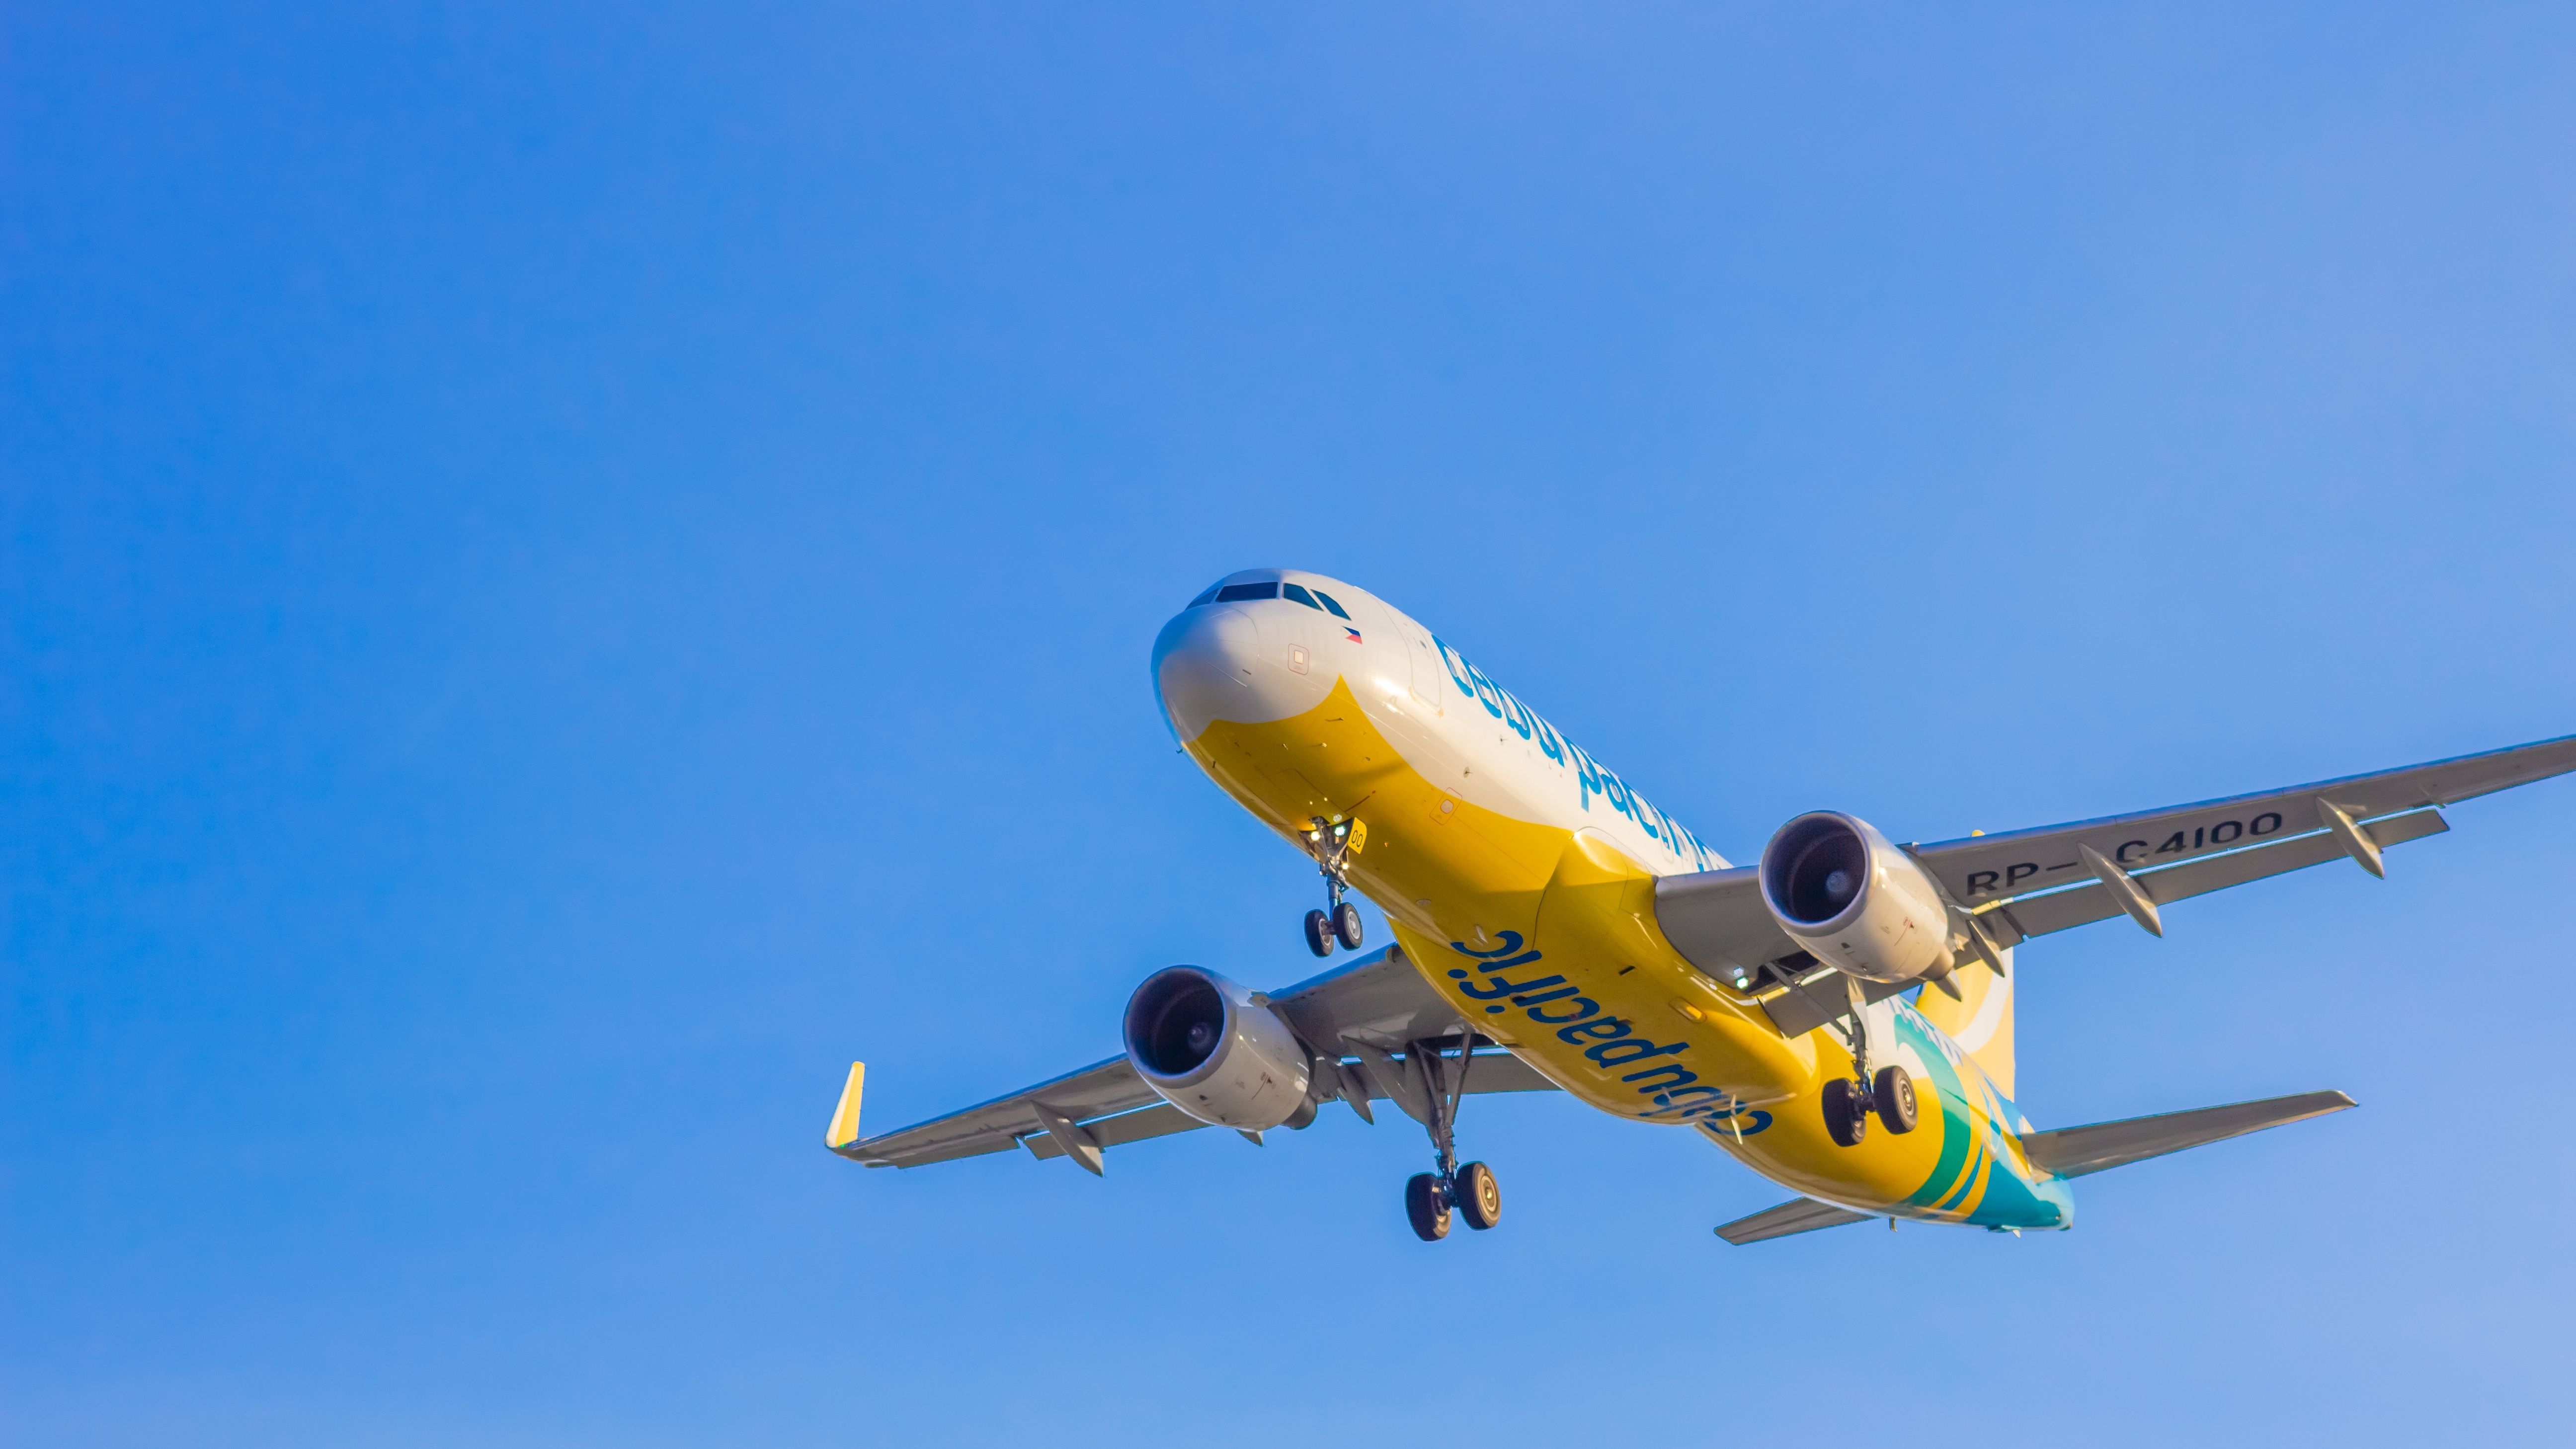 Cebu Pacific Airbus A320neo flying in the sky.